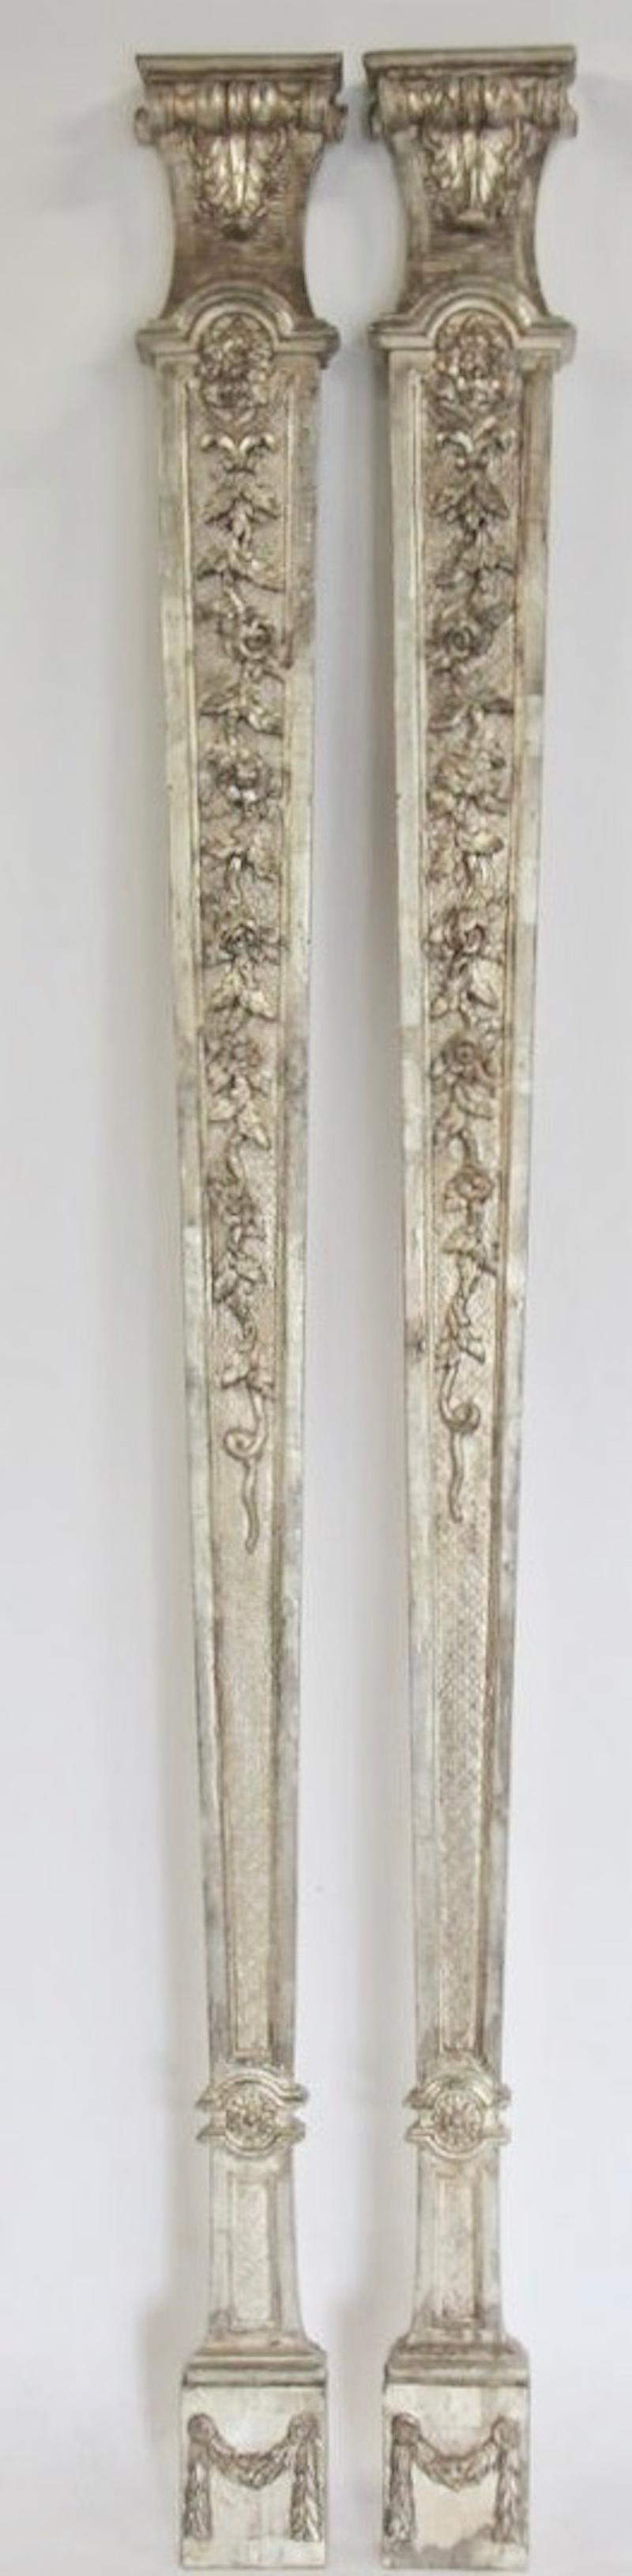 Pair of Antique Silver Giltwood Regency Style Pilasters For Sale 4